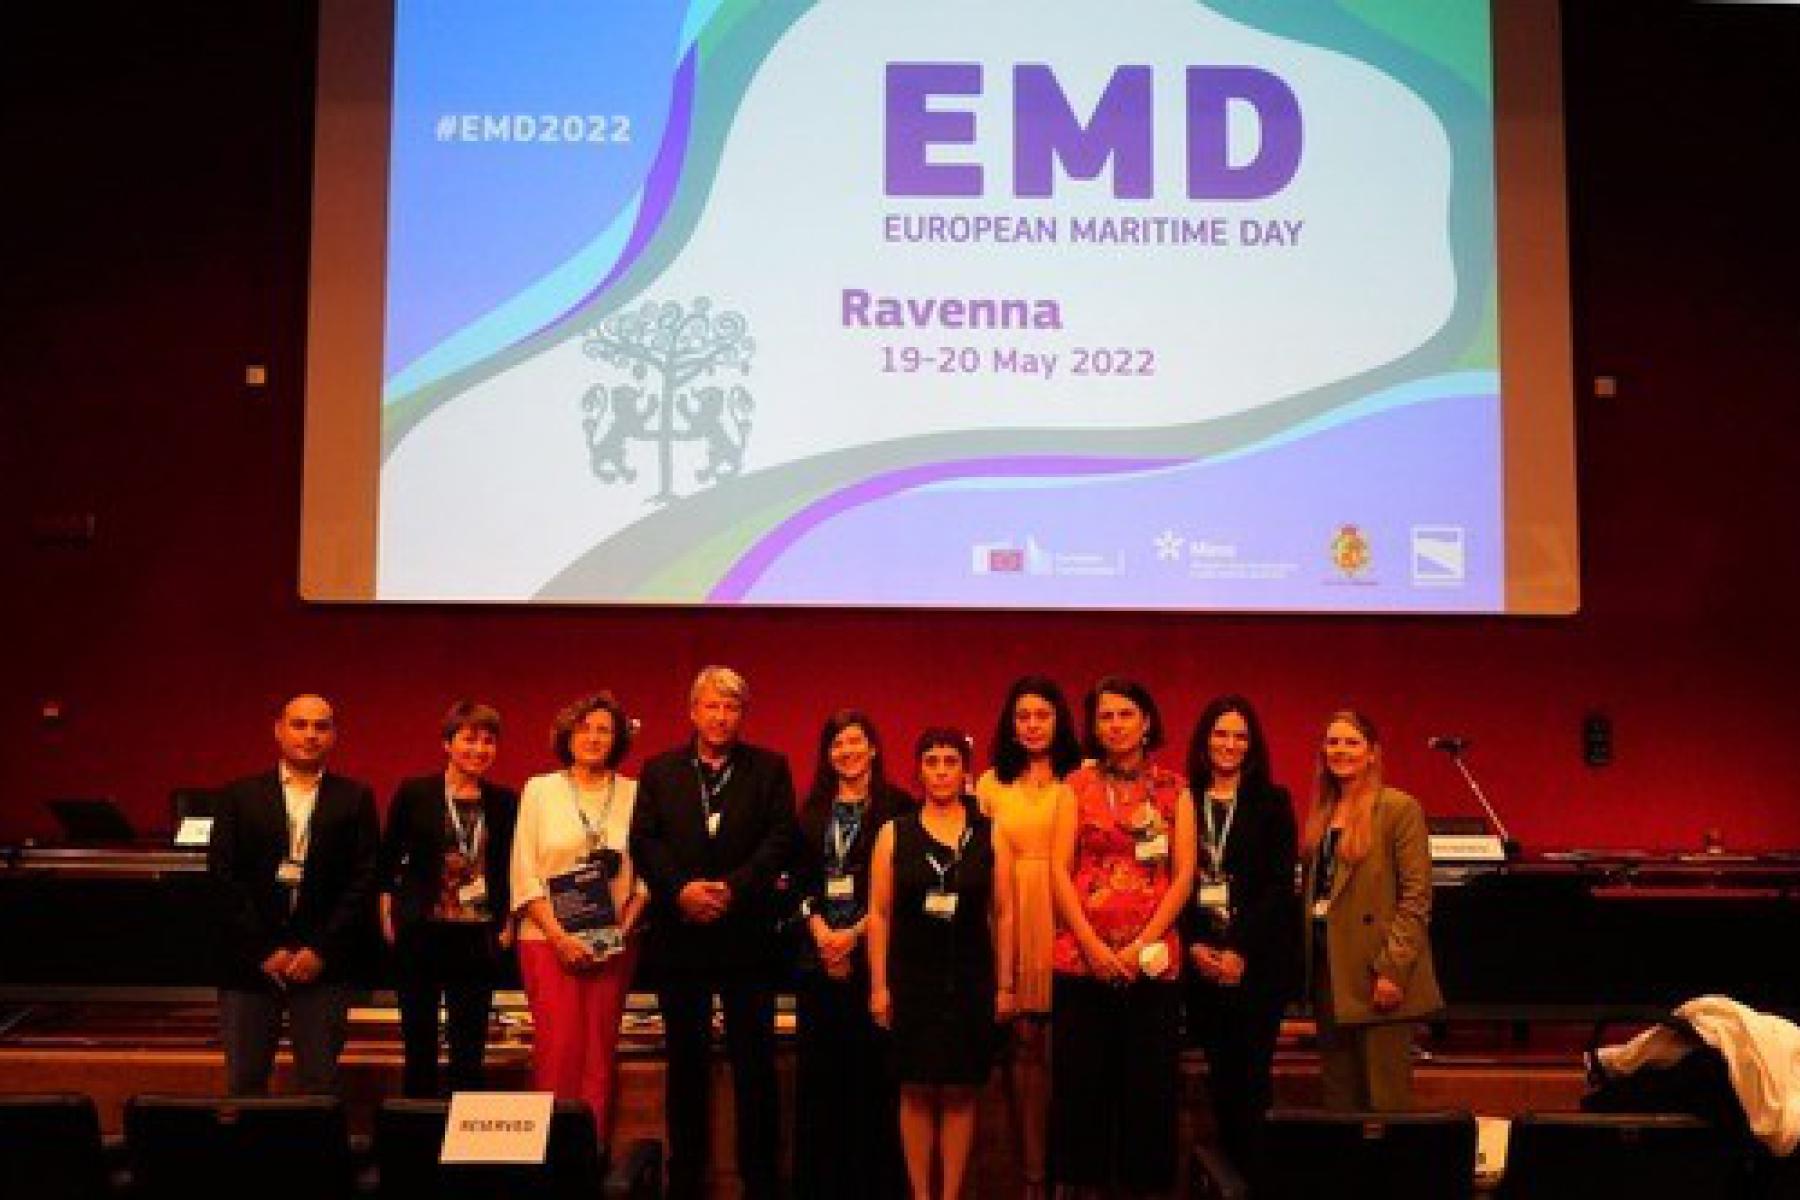 EMD2022 group picture inside event. ©European Union, 2022